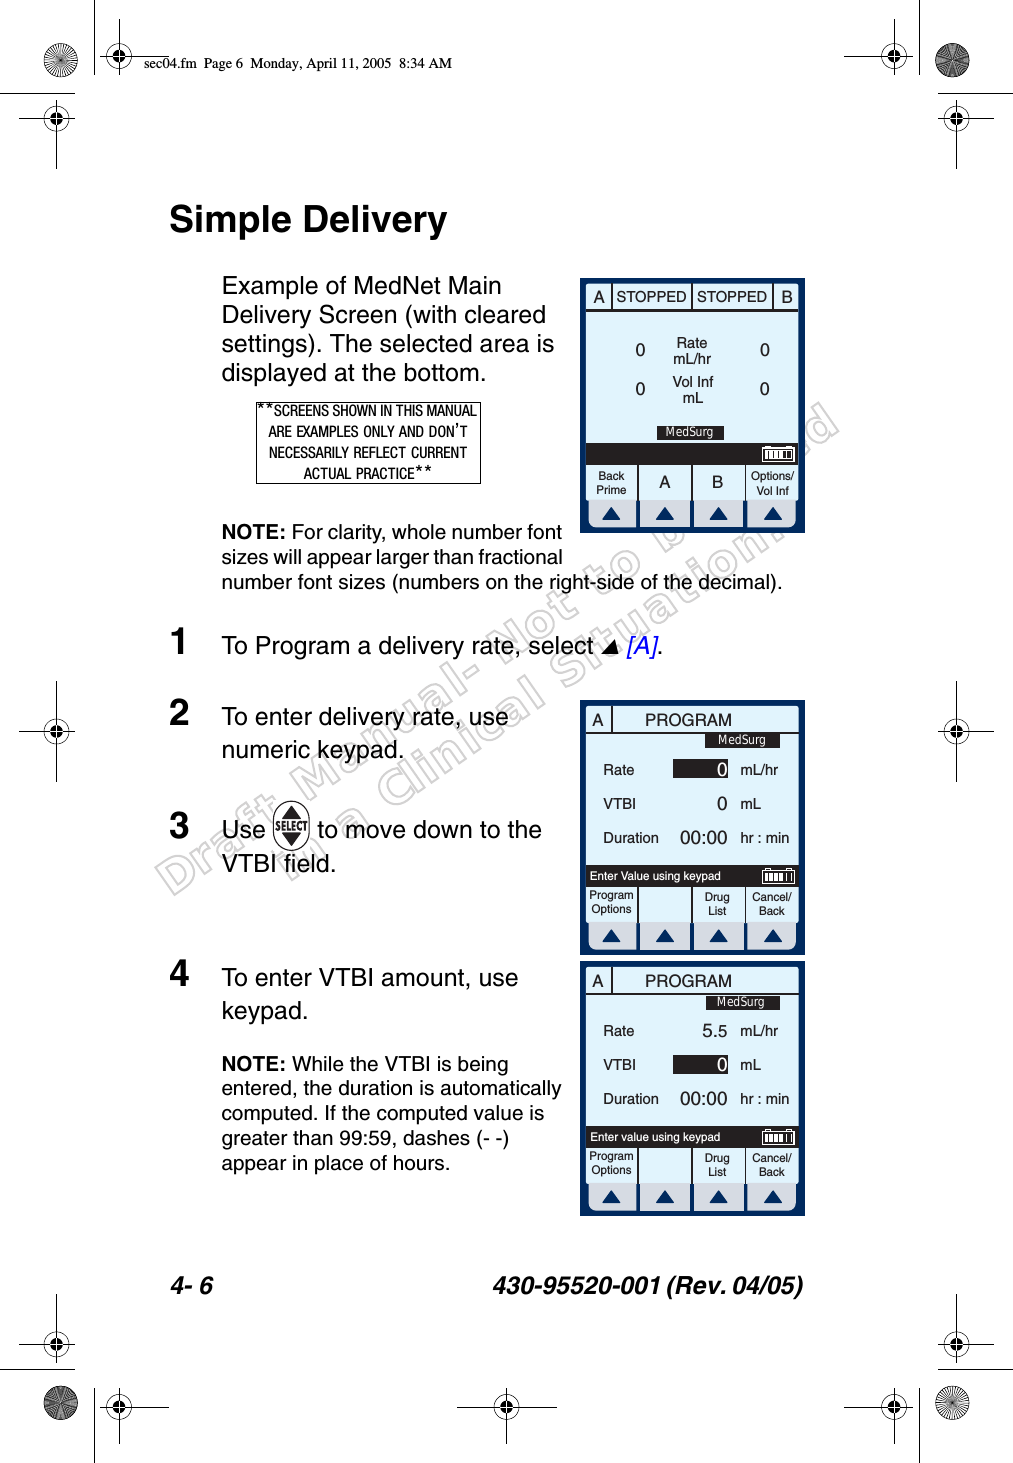 Draft Manual- Not to be usedin a Clinical Situation.4- 6 430-95520-001 (Rev. 04/05) Simple DeliveryExample of MedNet Main Delivery Screen (with cleared settings). The selected area is displayed at the bottom.NOTE: For clarity, whole number font sizes will appear larger than fractional number font sizes (numbers on the right-side of the decimal).1To Program a delivery rate, select  [A].2To enter delivery rate, use numeric keypad.3Use   to move down to the VTBI field.4To enter VTBI amount, use keypad.NOTE: While the VTBI is being entered, the duration is automatically computed. If the computed value is greater than 99:59, dashes (- -) appear in place of hours.AABBSTOPPED STOPPEDRatemL/hrVol InfmLOptions/Vol InfBackPrime0000MedSurg**SCREENS SHOWN IN THIS MANUAL ARE EXAMPLES ONLY AND DON’T NECESSARILY REFLECT CURRENT ACTUAL PRACTICE**APROGRAMRateVTBIDurationmL/hrmLhr : minProgramOptionsCancel/BackDrug ListEnter Value using keypad0000:00MedSurgAPROGRAMRateVTBIDurationmL/hrmLhr : minProgramOptionsCancel/BackDrug ListEnter value using keypad5.5000:00MedSurgsec04.fm  Page 6  Monday, April 11, 2005  8:34 AM